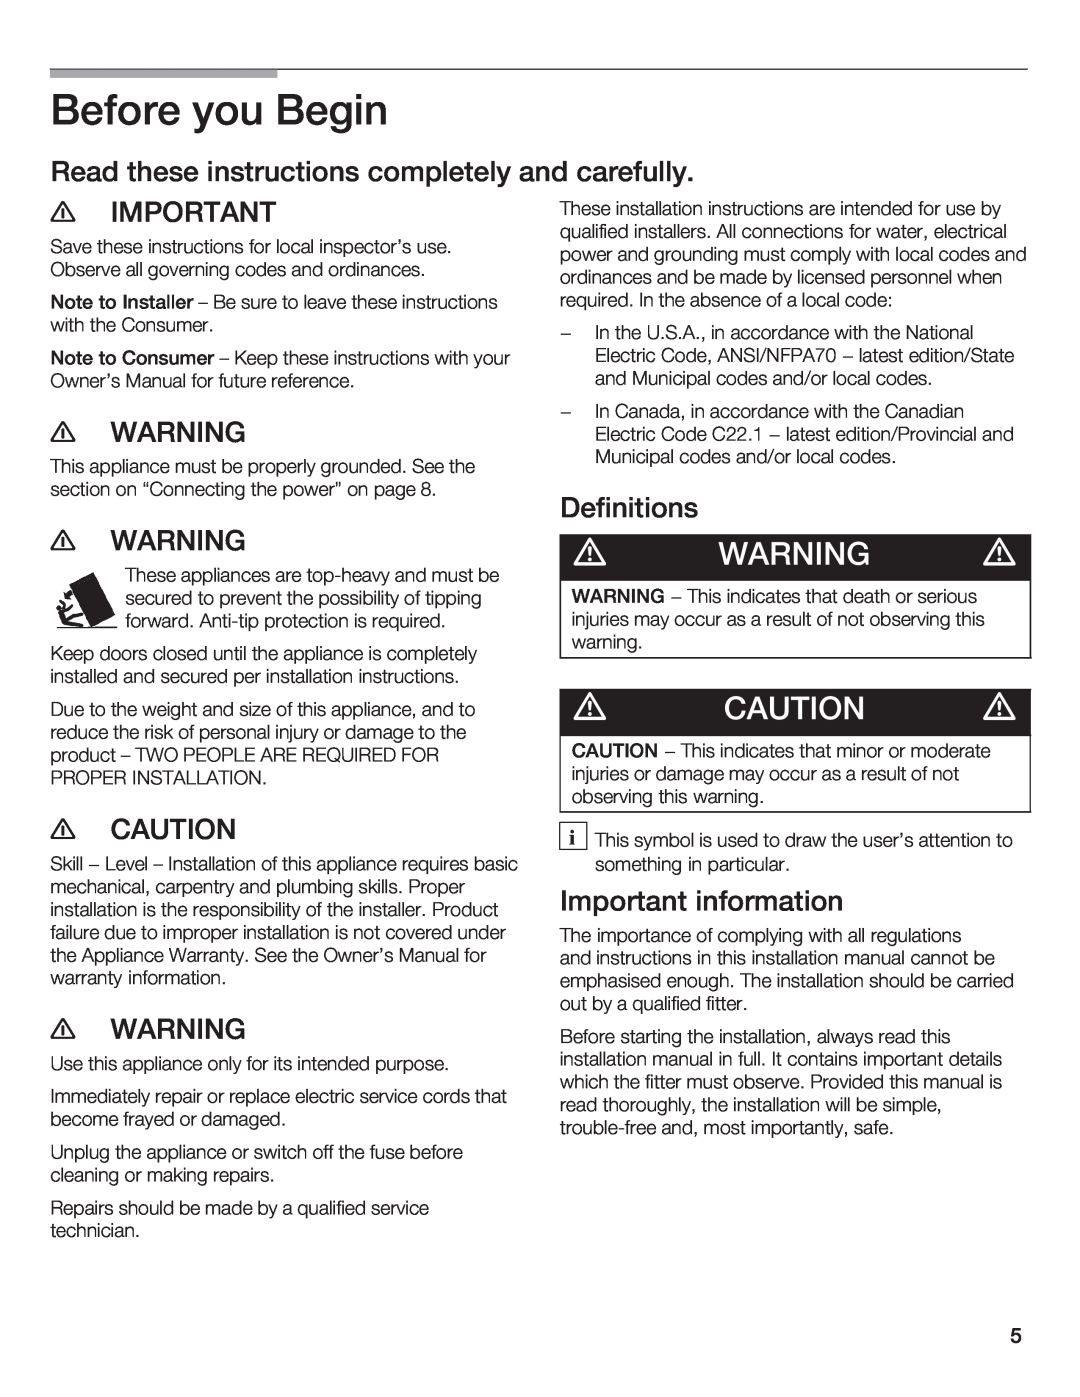 Thermador T36IB70NSP manual Before you Begin, WARNING d, CAUTION d 